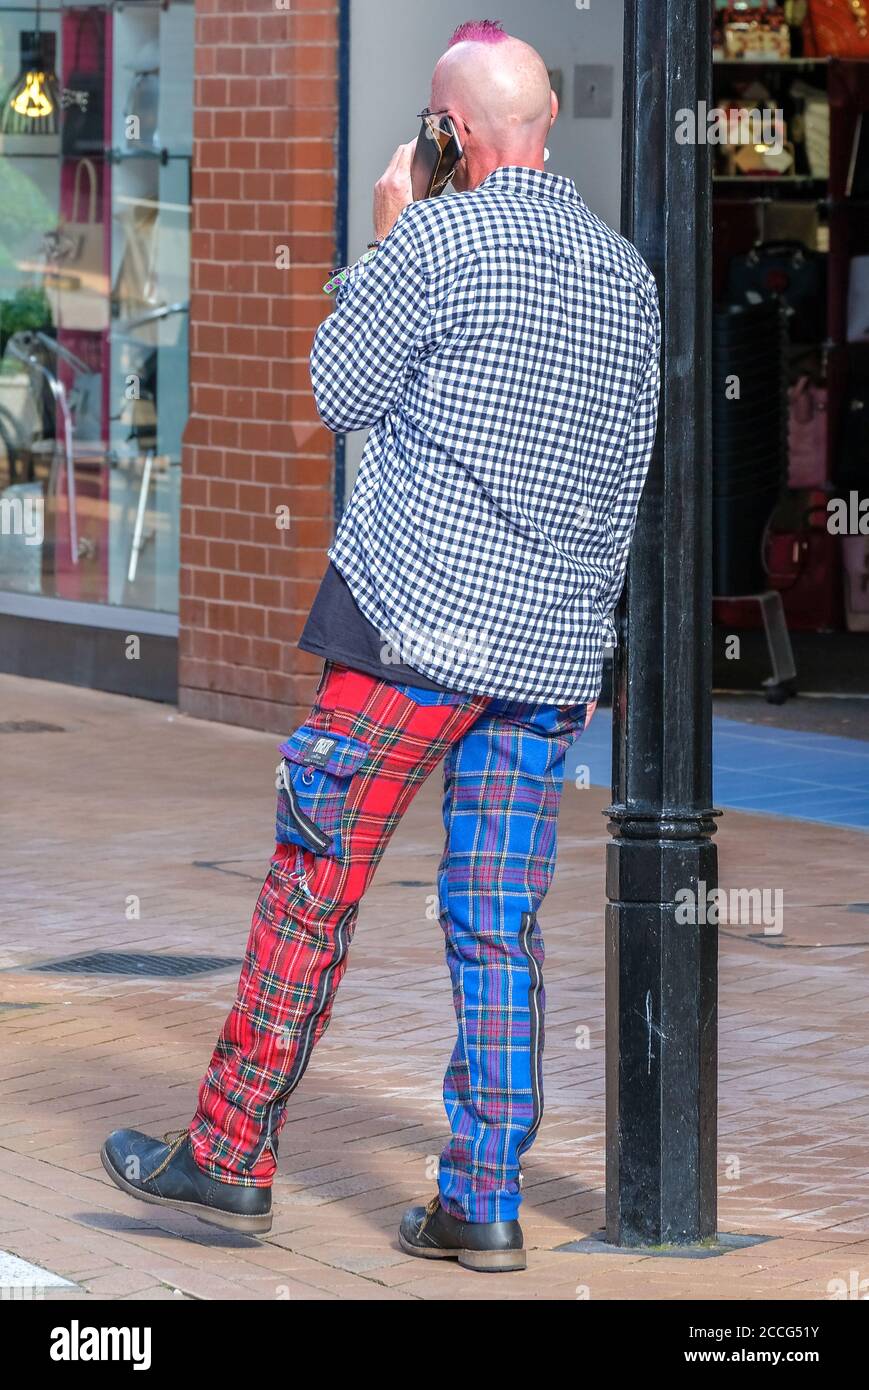 punk leaning against lamp-post and sporting alternate blue/red checked trousers Stock Photo